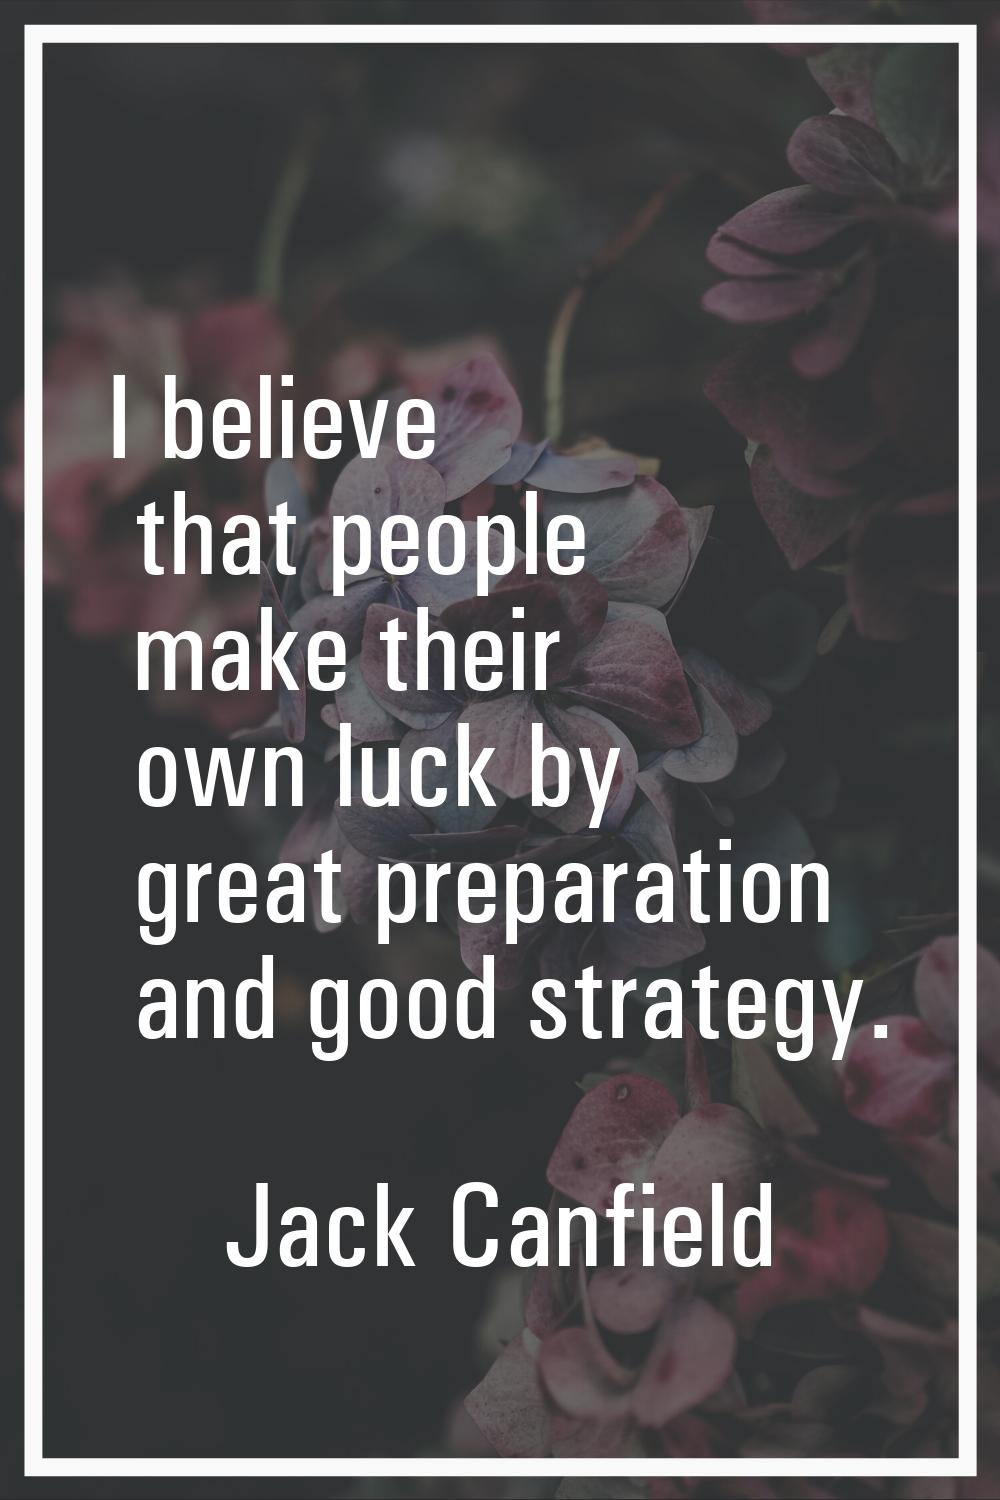 I believe that people make their own luck by great preparation and good strategy.